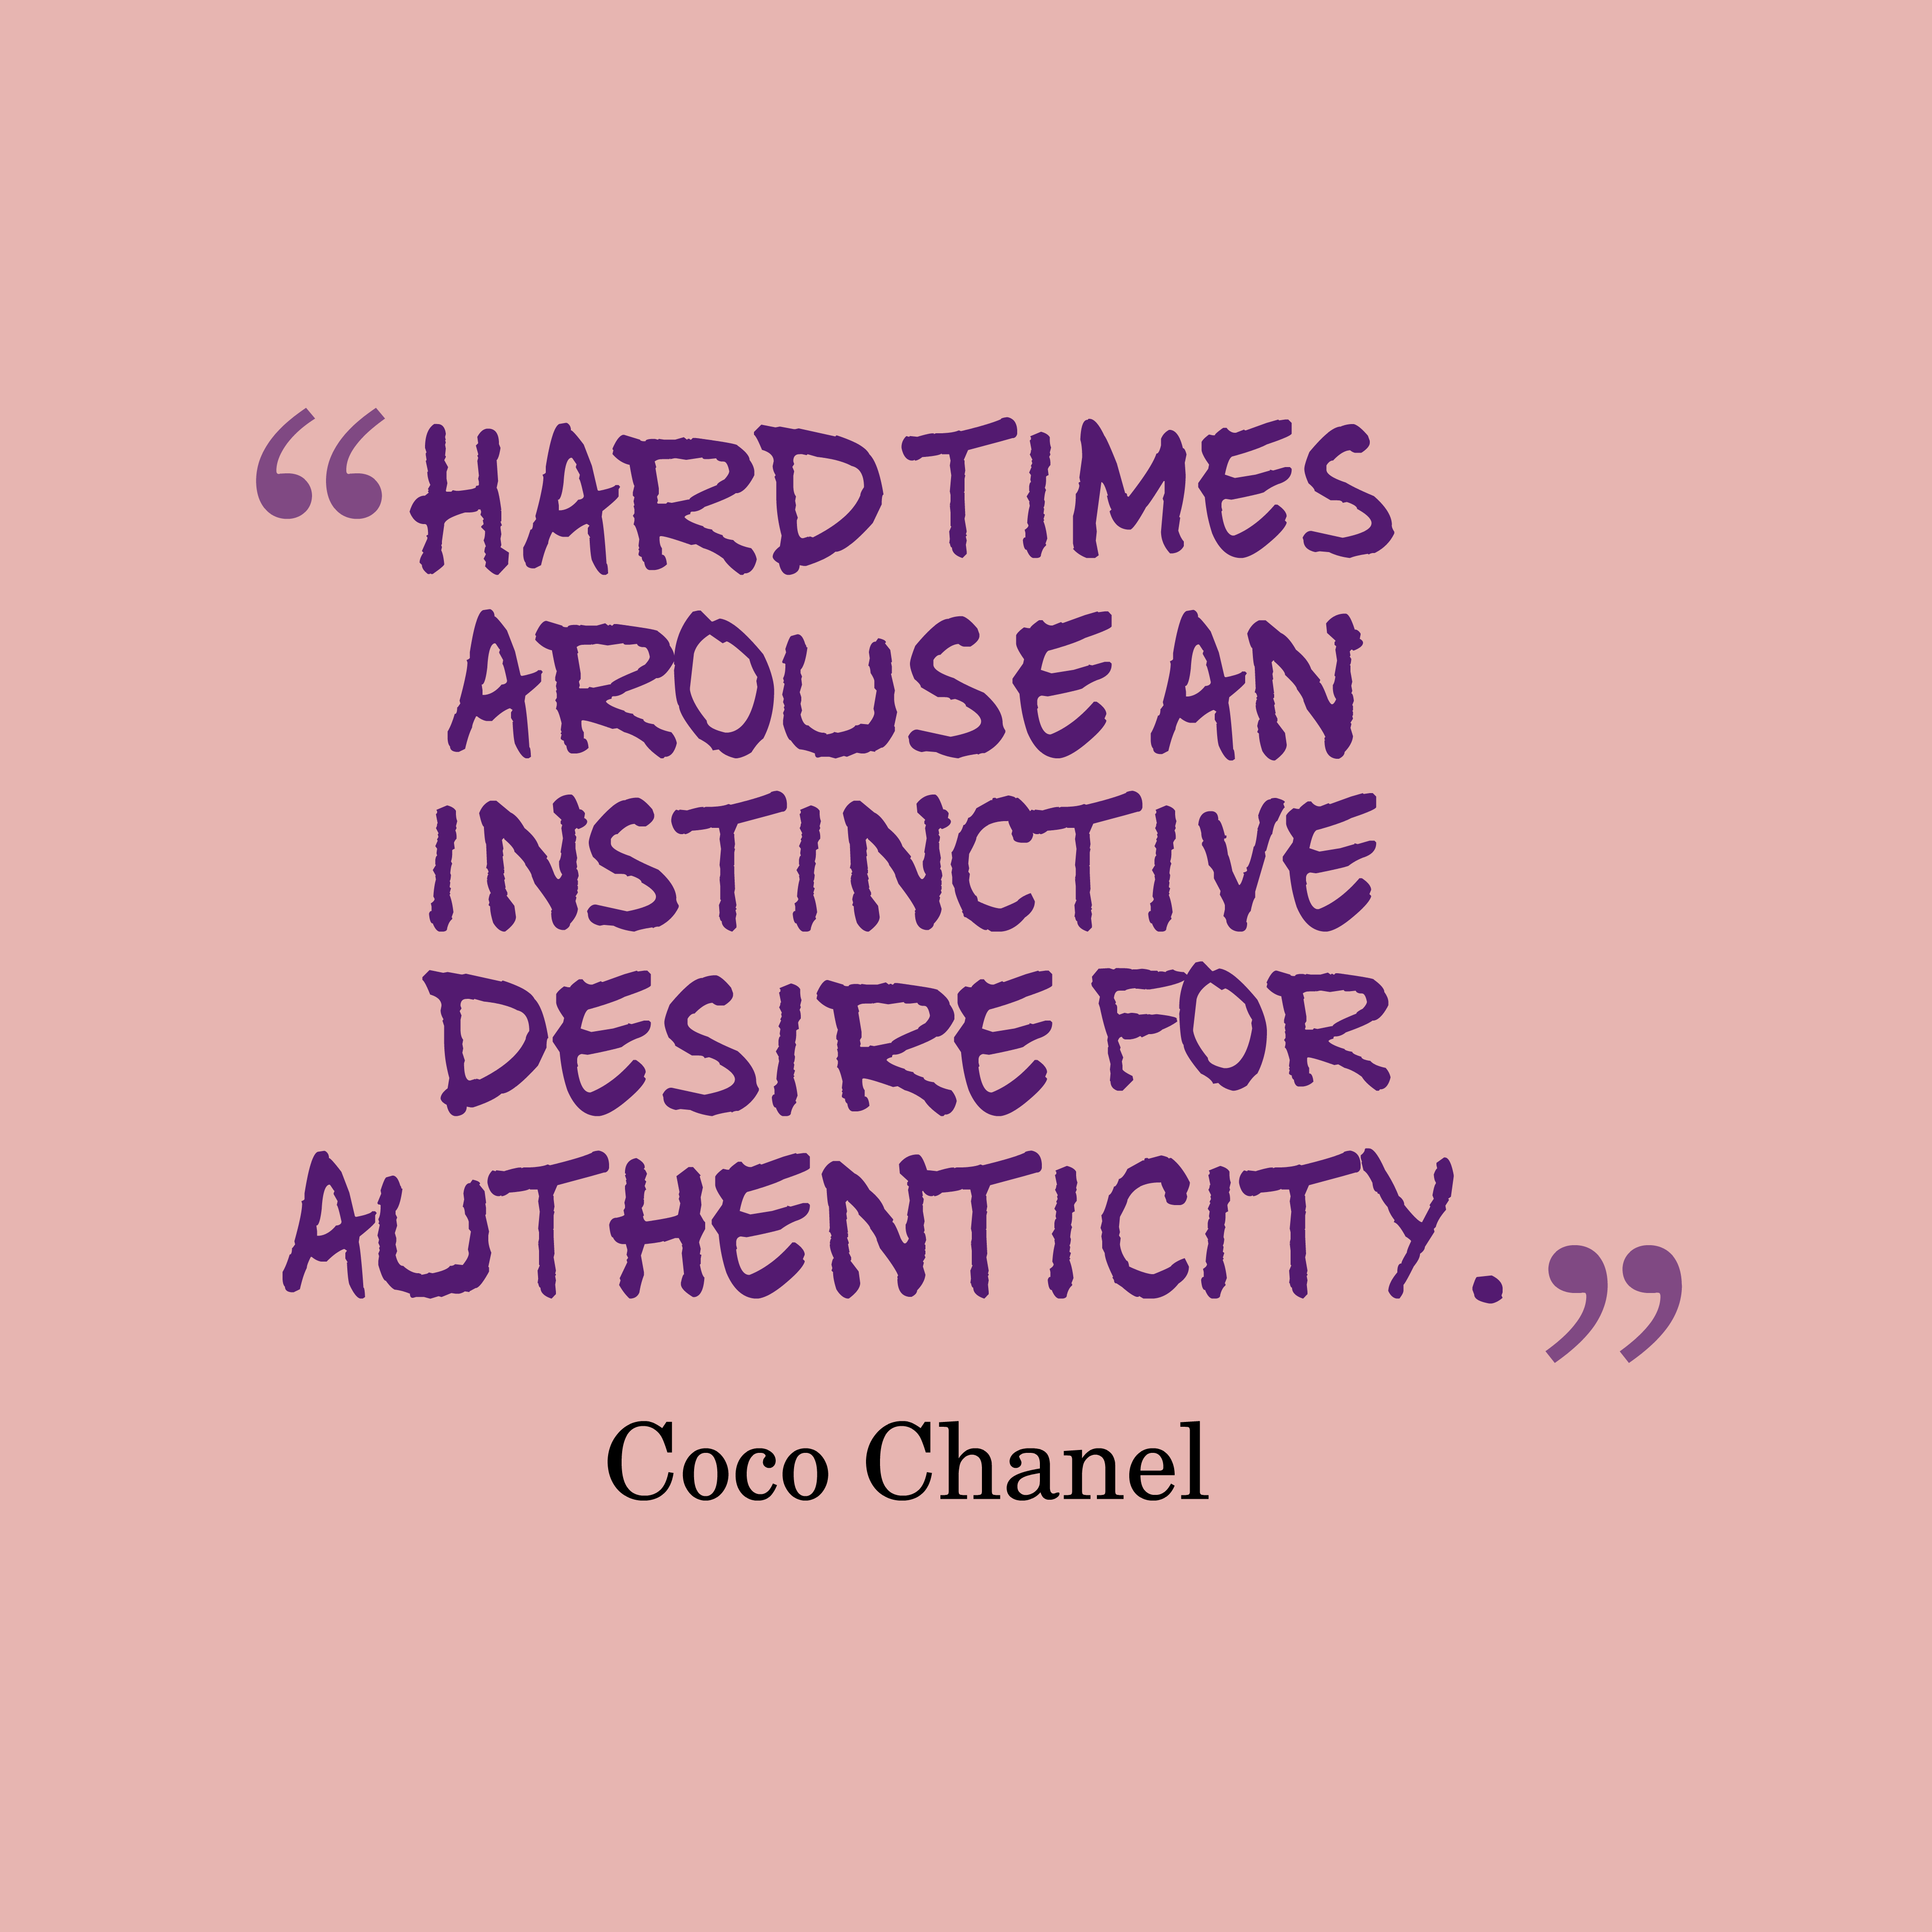 Chanel Quotes About Life. QuotesGram